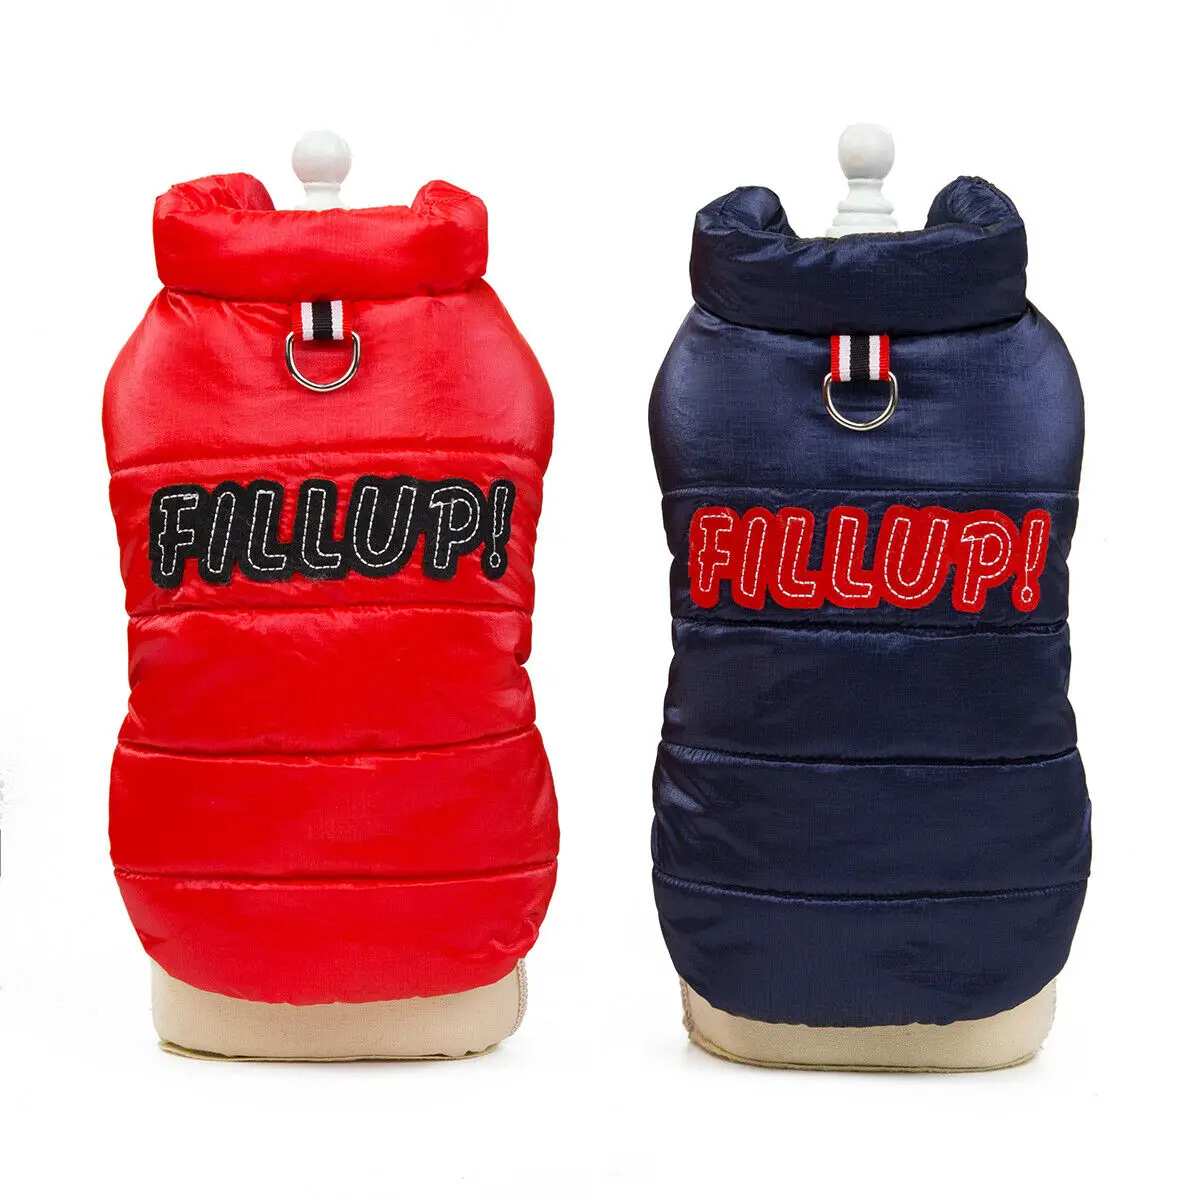 Waterproof Pet Dog Puppy Vest Jacket Clothing Warm Winter Clothes Coat drop shipping | Дом и сад